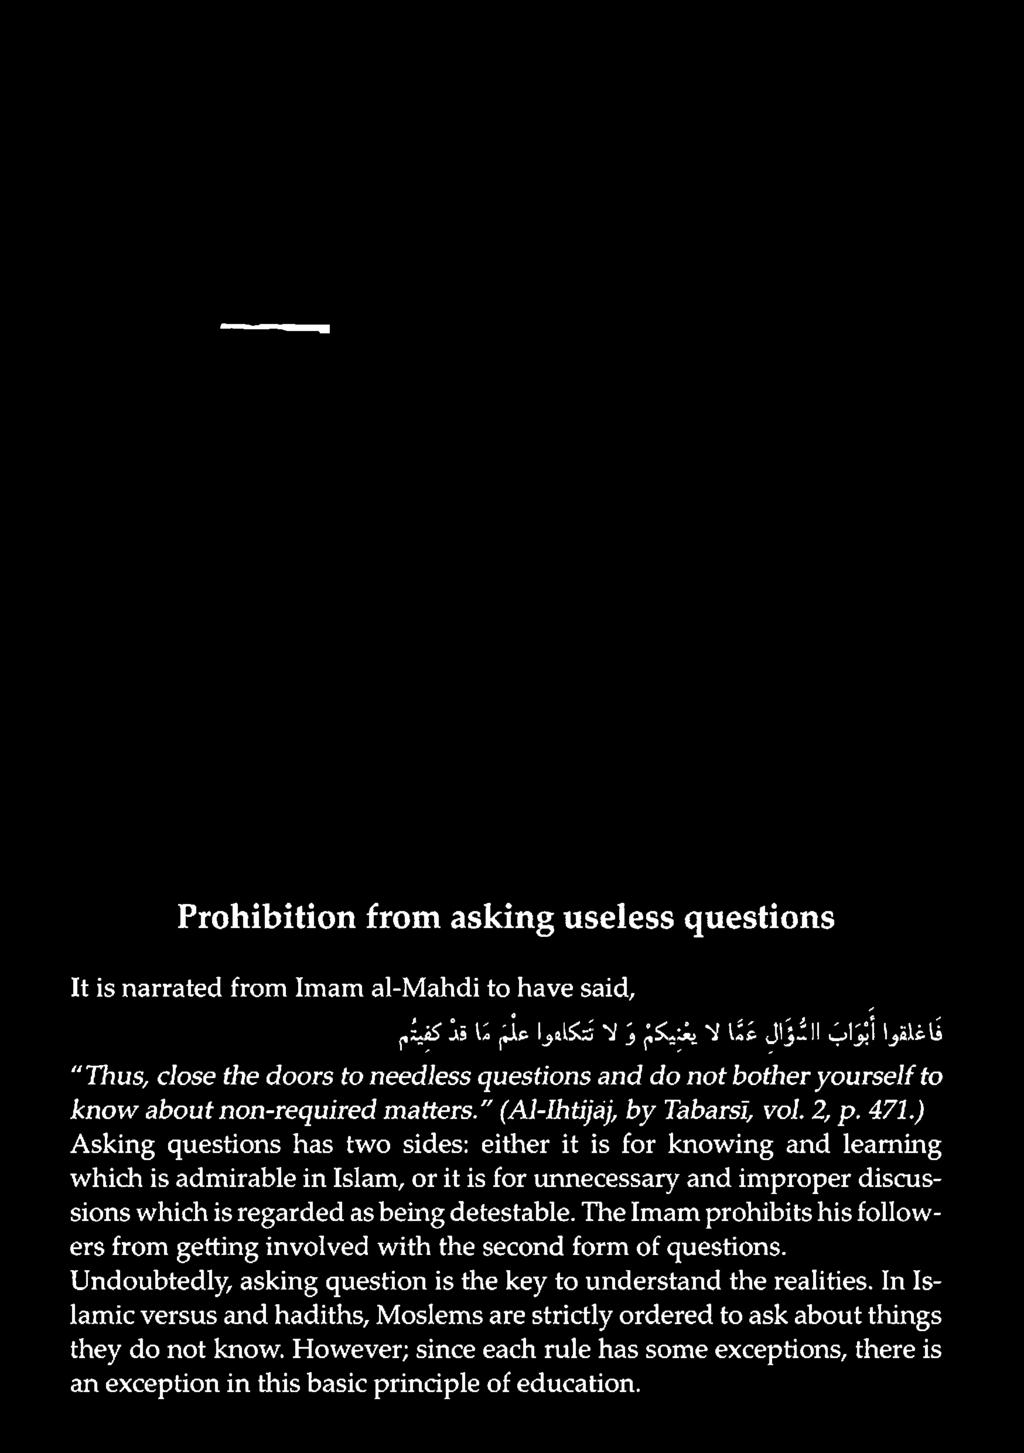 Prohibition from asking useless questions It is narrated from Imam al-mahdi to have said, فاغلقوا بنا ب الثو اي غي ا ال يبيك ب ذ ال تتكلعوا علء نا قذ كبيثم "Thus, close the doors to needless